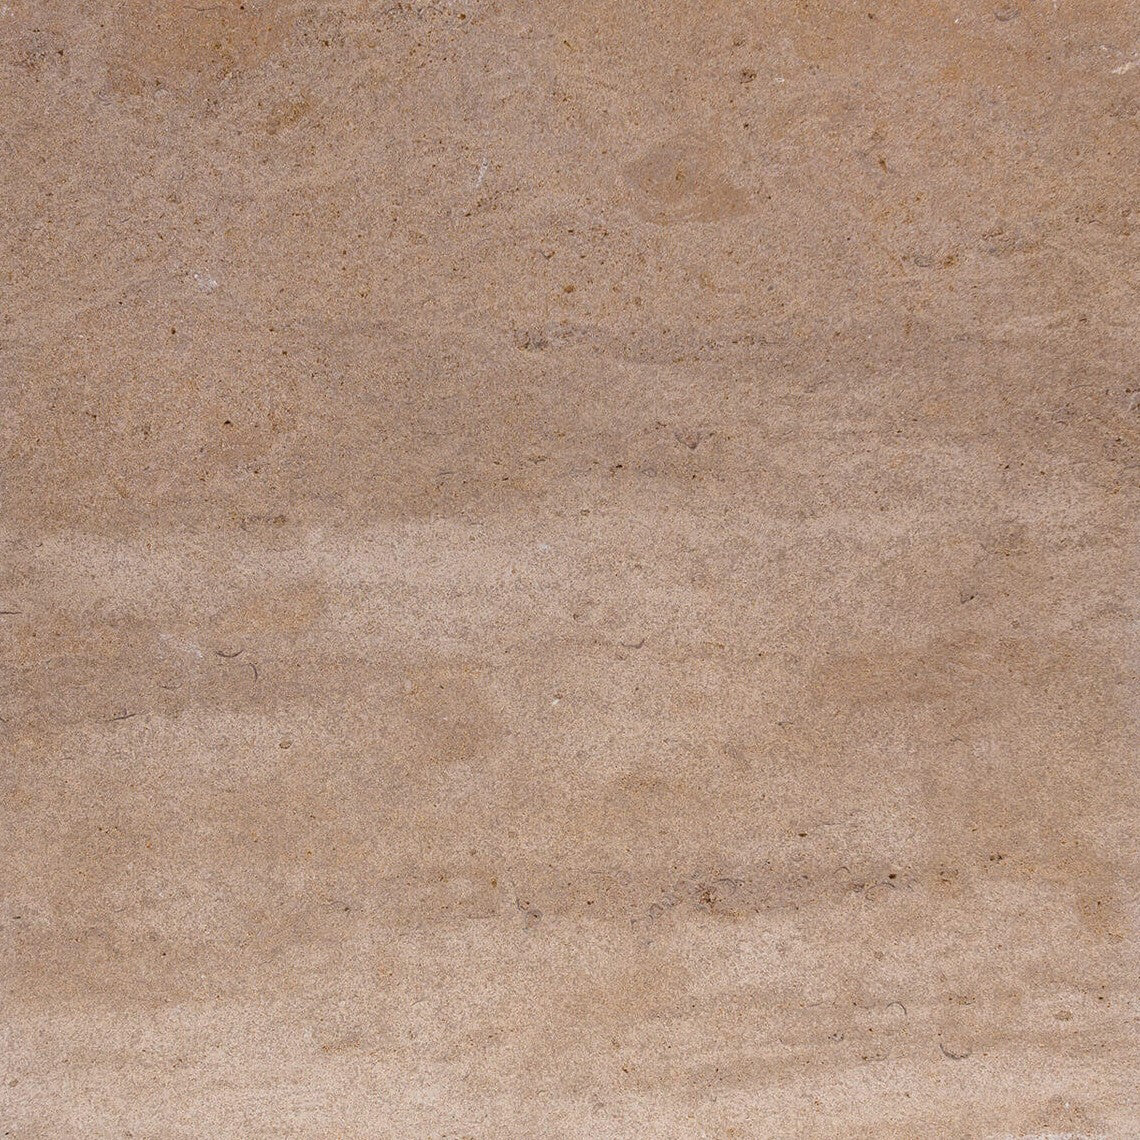 beaumaniere limestone beige stone tile  sold by surface group